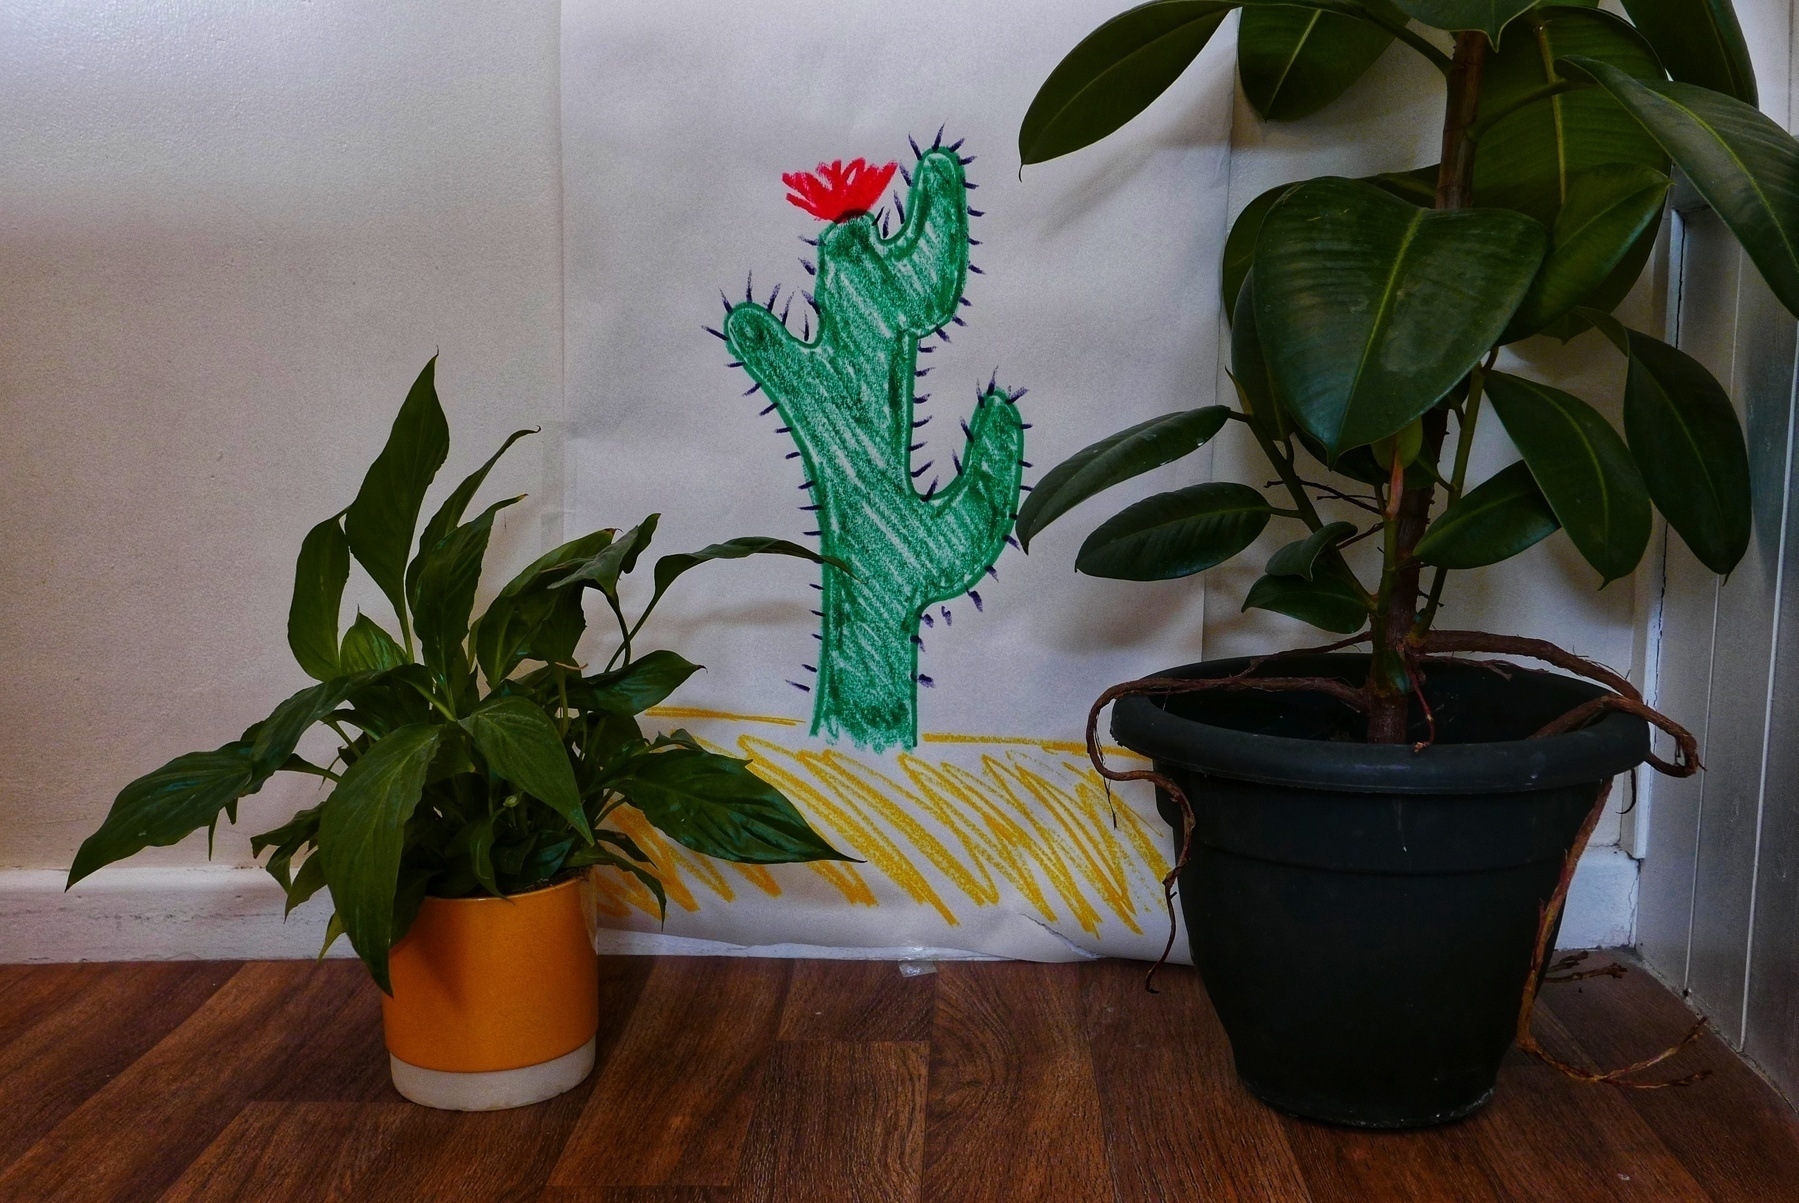 A photograph of a child-like crayon drawing of a cactus, next to two real houseplants